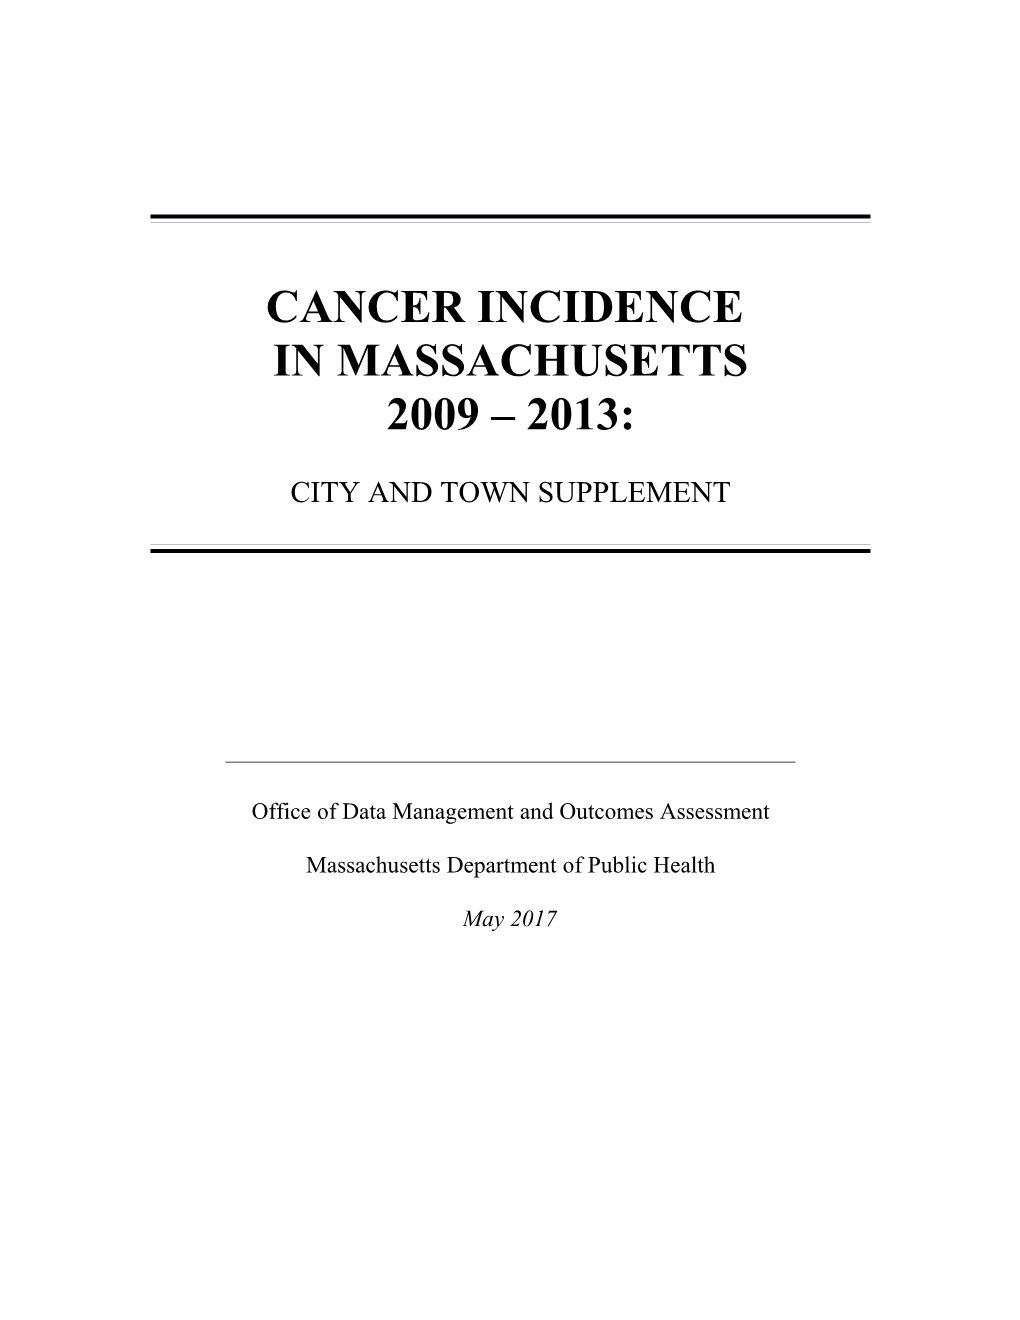 Cancer Incidence in Massachusetts 2009-2013: City and Town Supplement